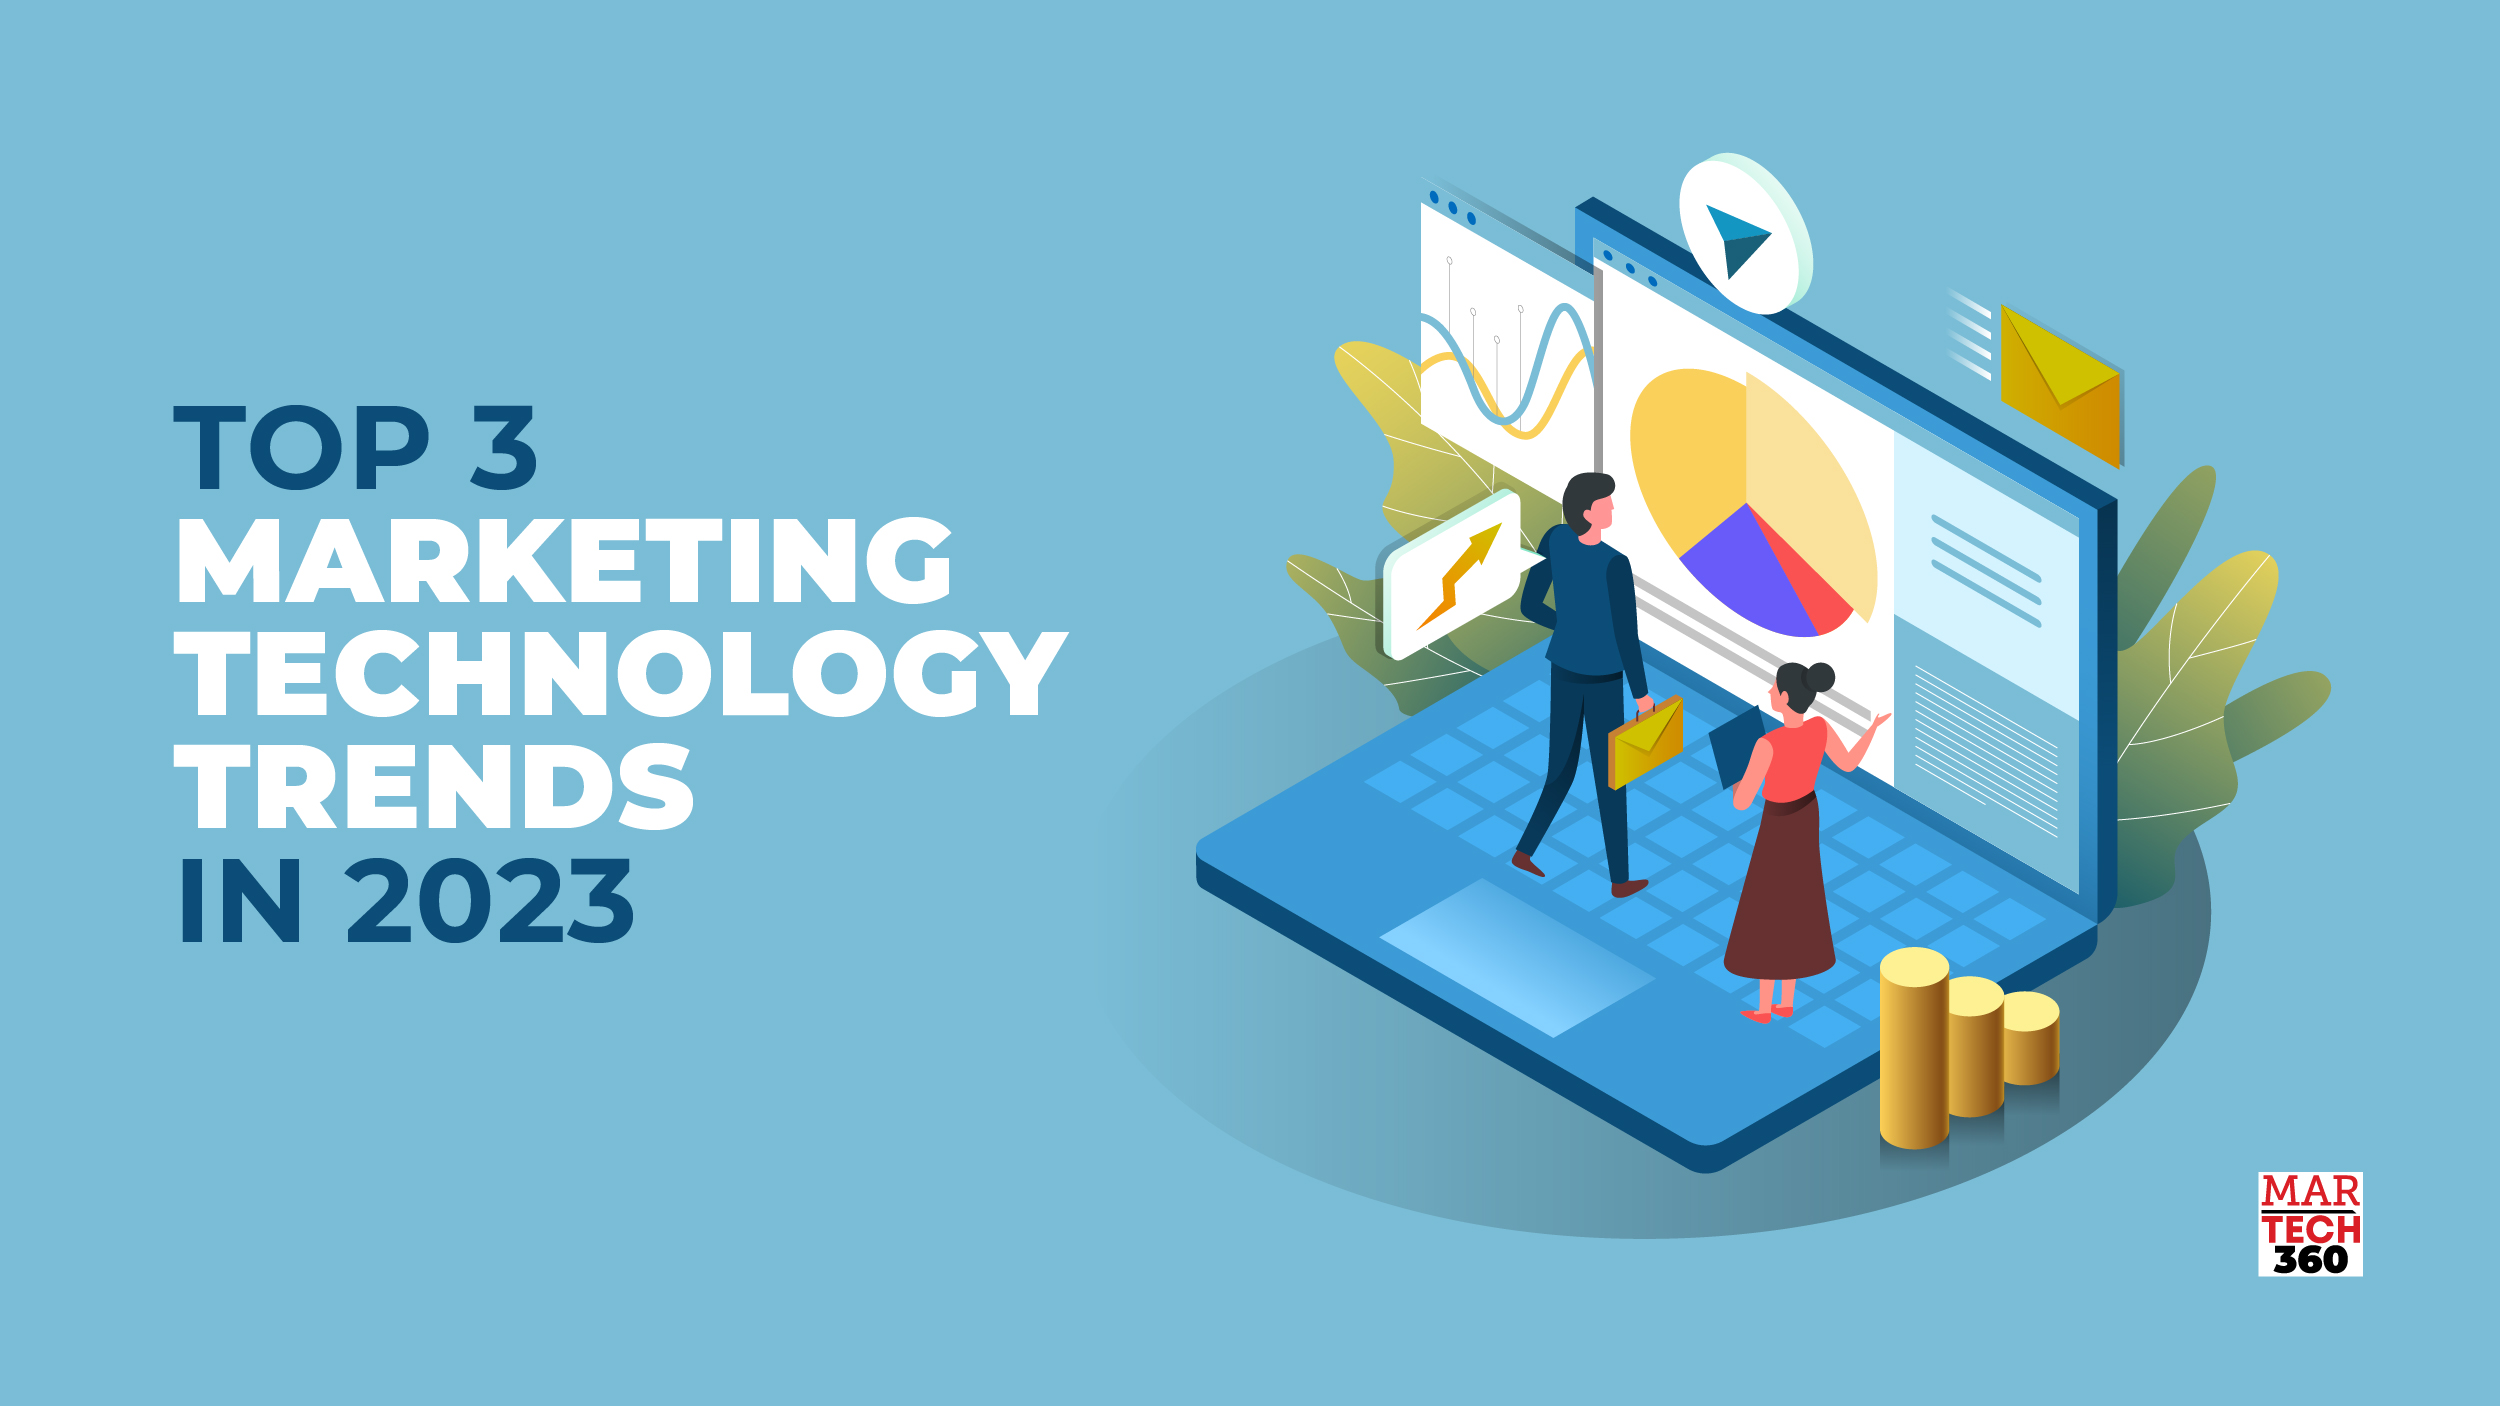 Top 3 Marketing Technology Trends in 2023